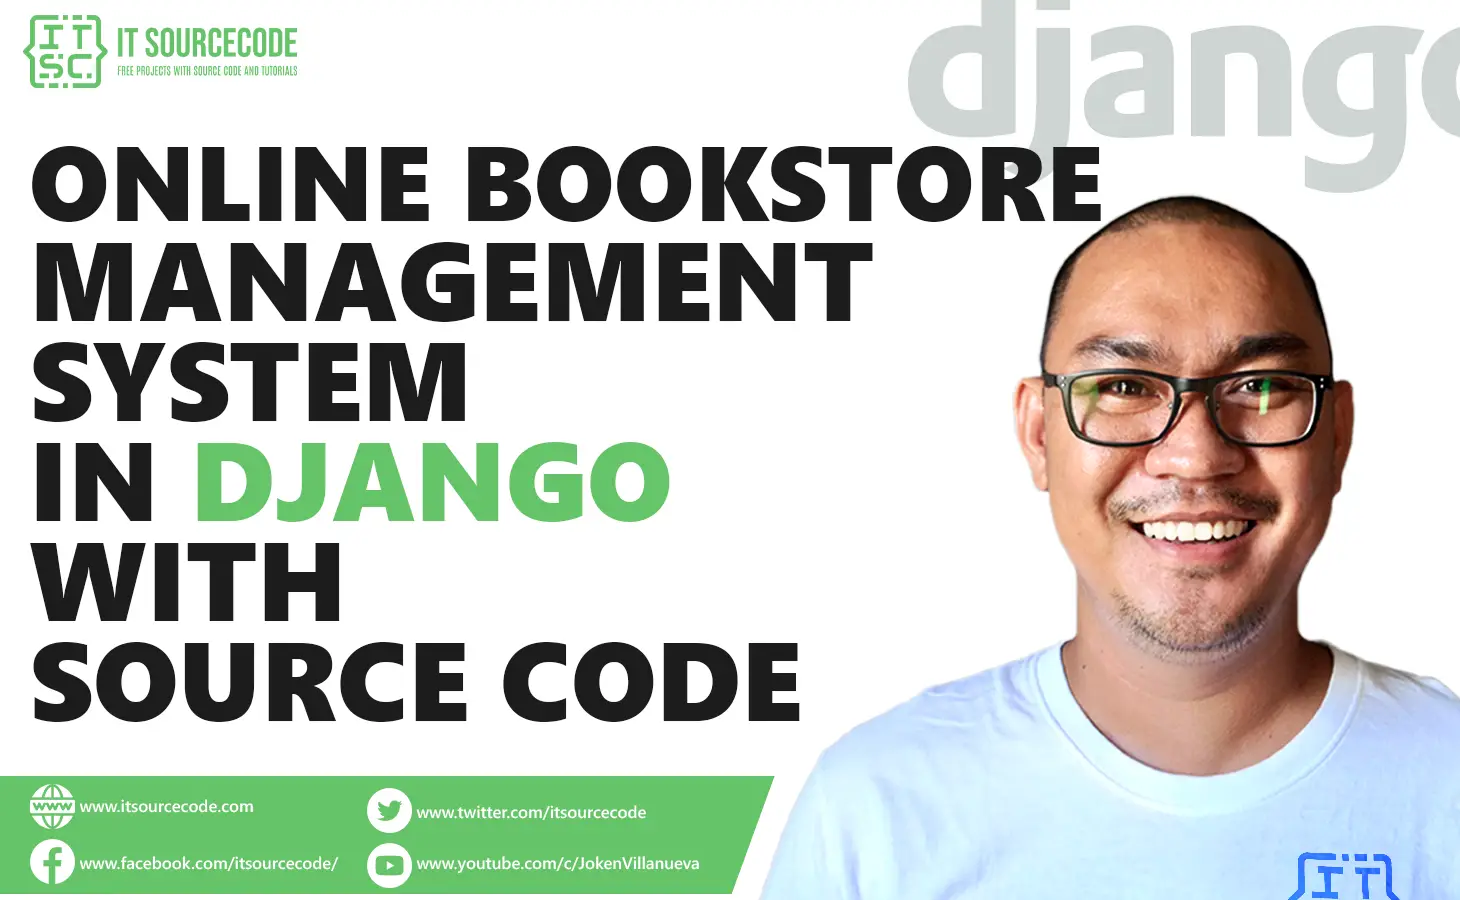 Online Bookstore Management System in Django with Source Code